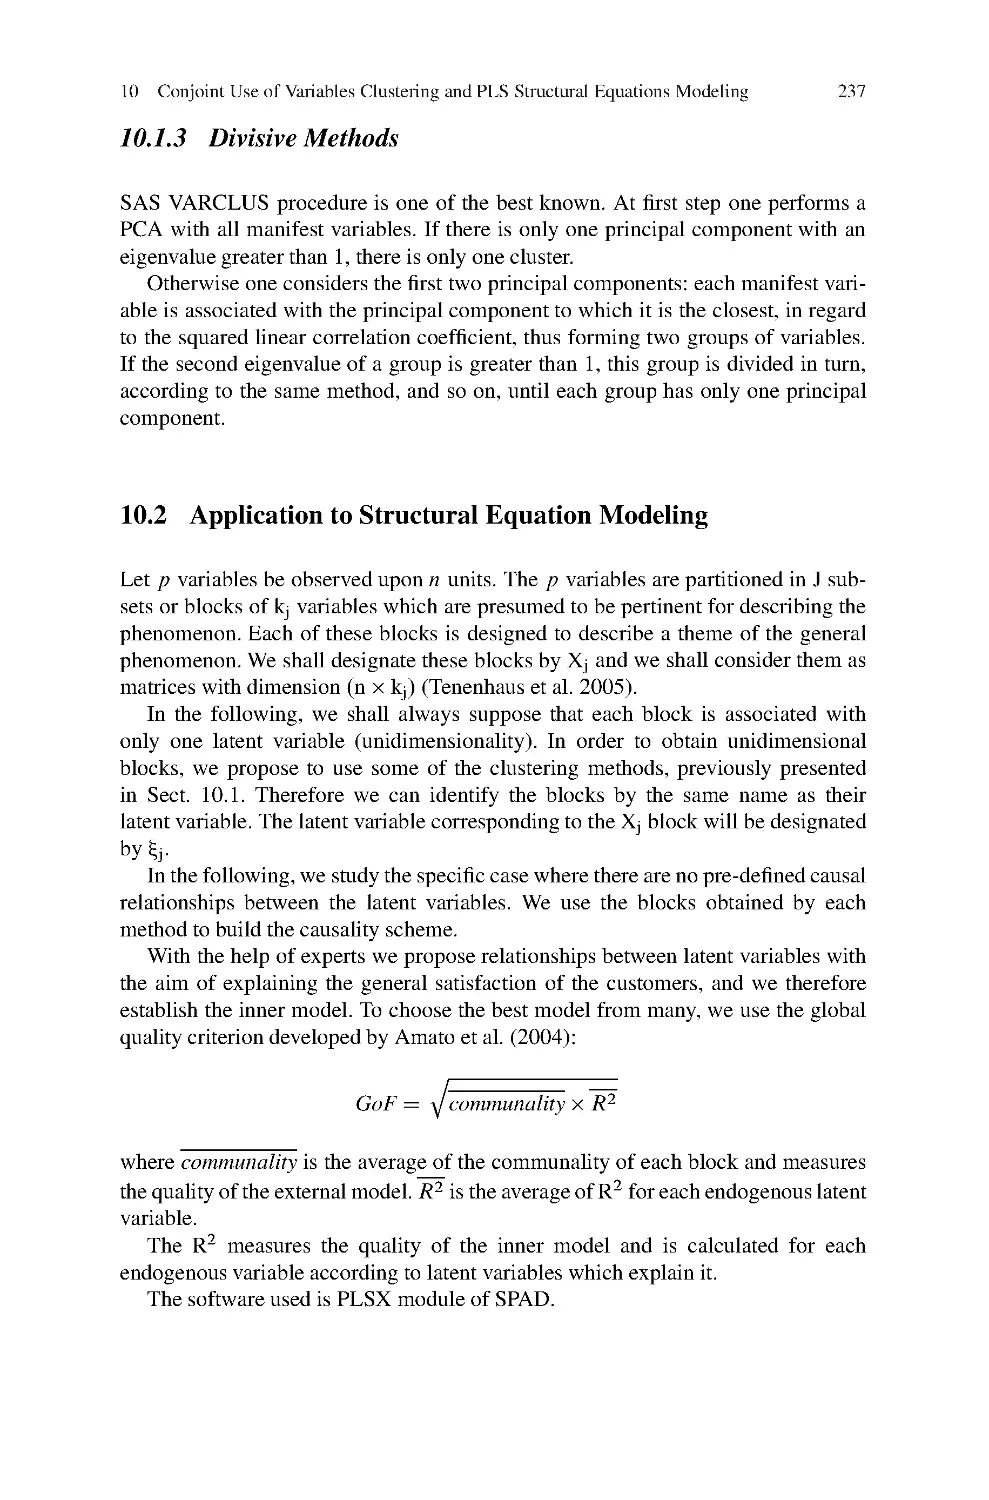 10.1.3 Divisive Methods
10.2 Application to Structural Equation Modeling